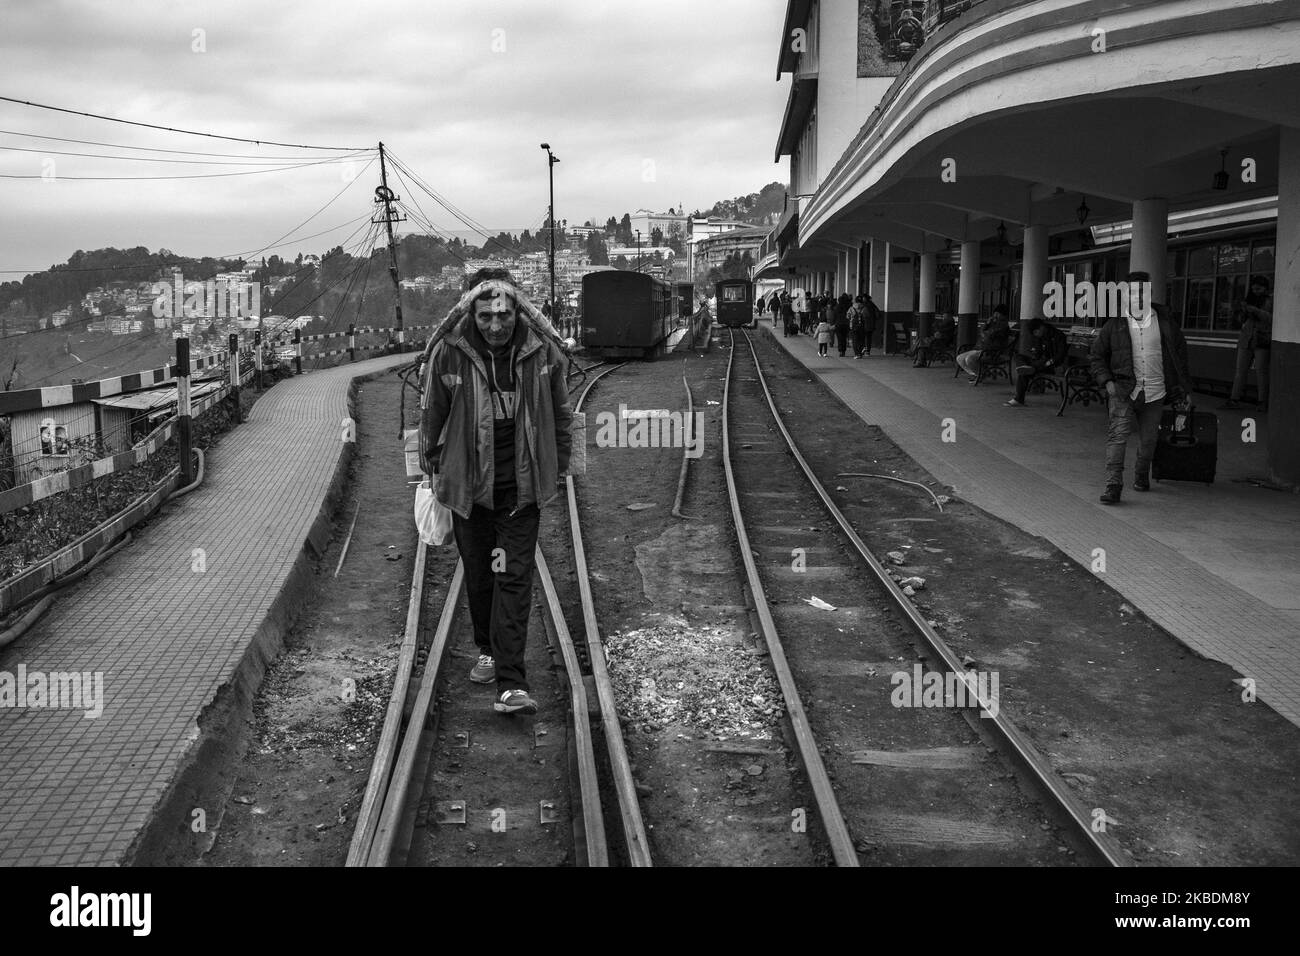 (EDITOR'S NOTE: Image was converted to black and white) A local hawker passing the railway tracks in Darjeeling, India on 20th Dec'19. - Darjeeling Himalayan Railway is one of the oldest two feet gauge railway in India which was settled by the British. Now it has been declared as a UNESCO World Heritage site on 5th December 1999. (Photo by Dipayan Bose/NurPhoto) Stock Photo